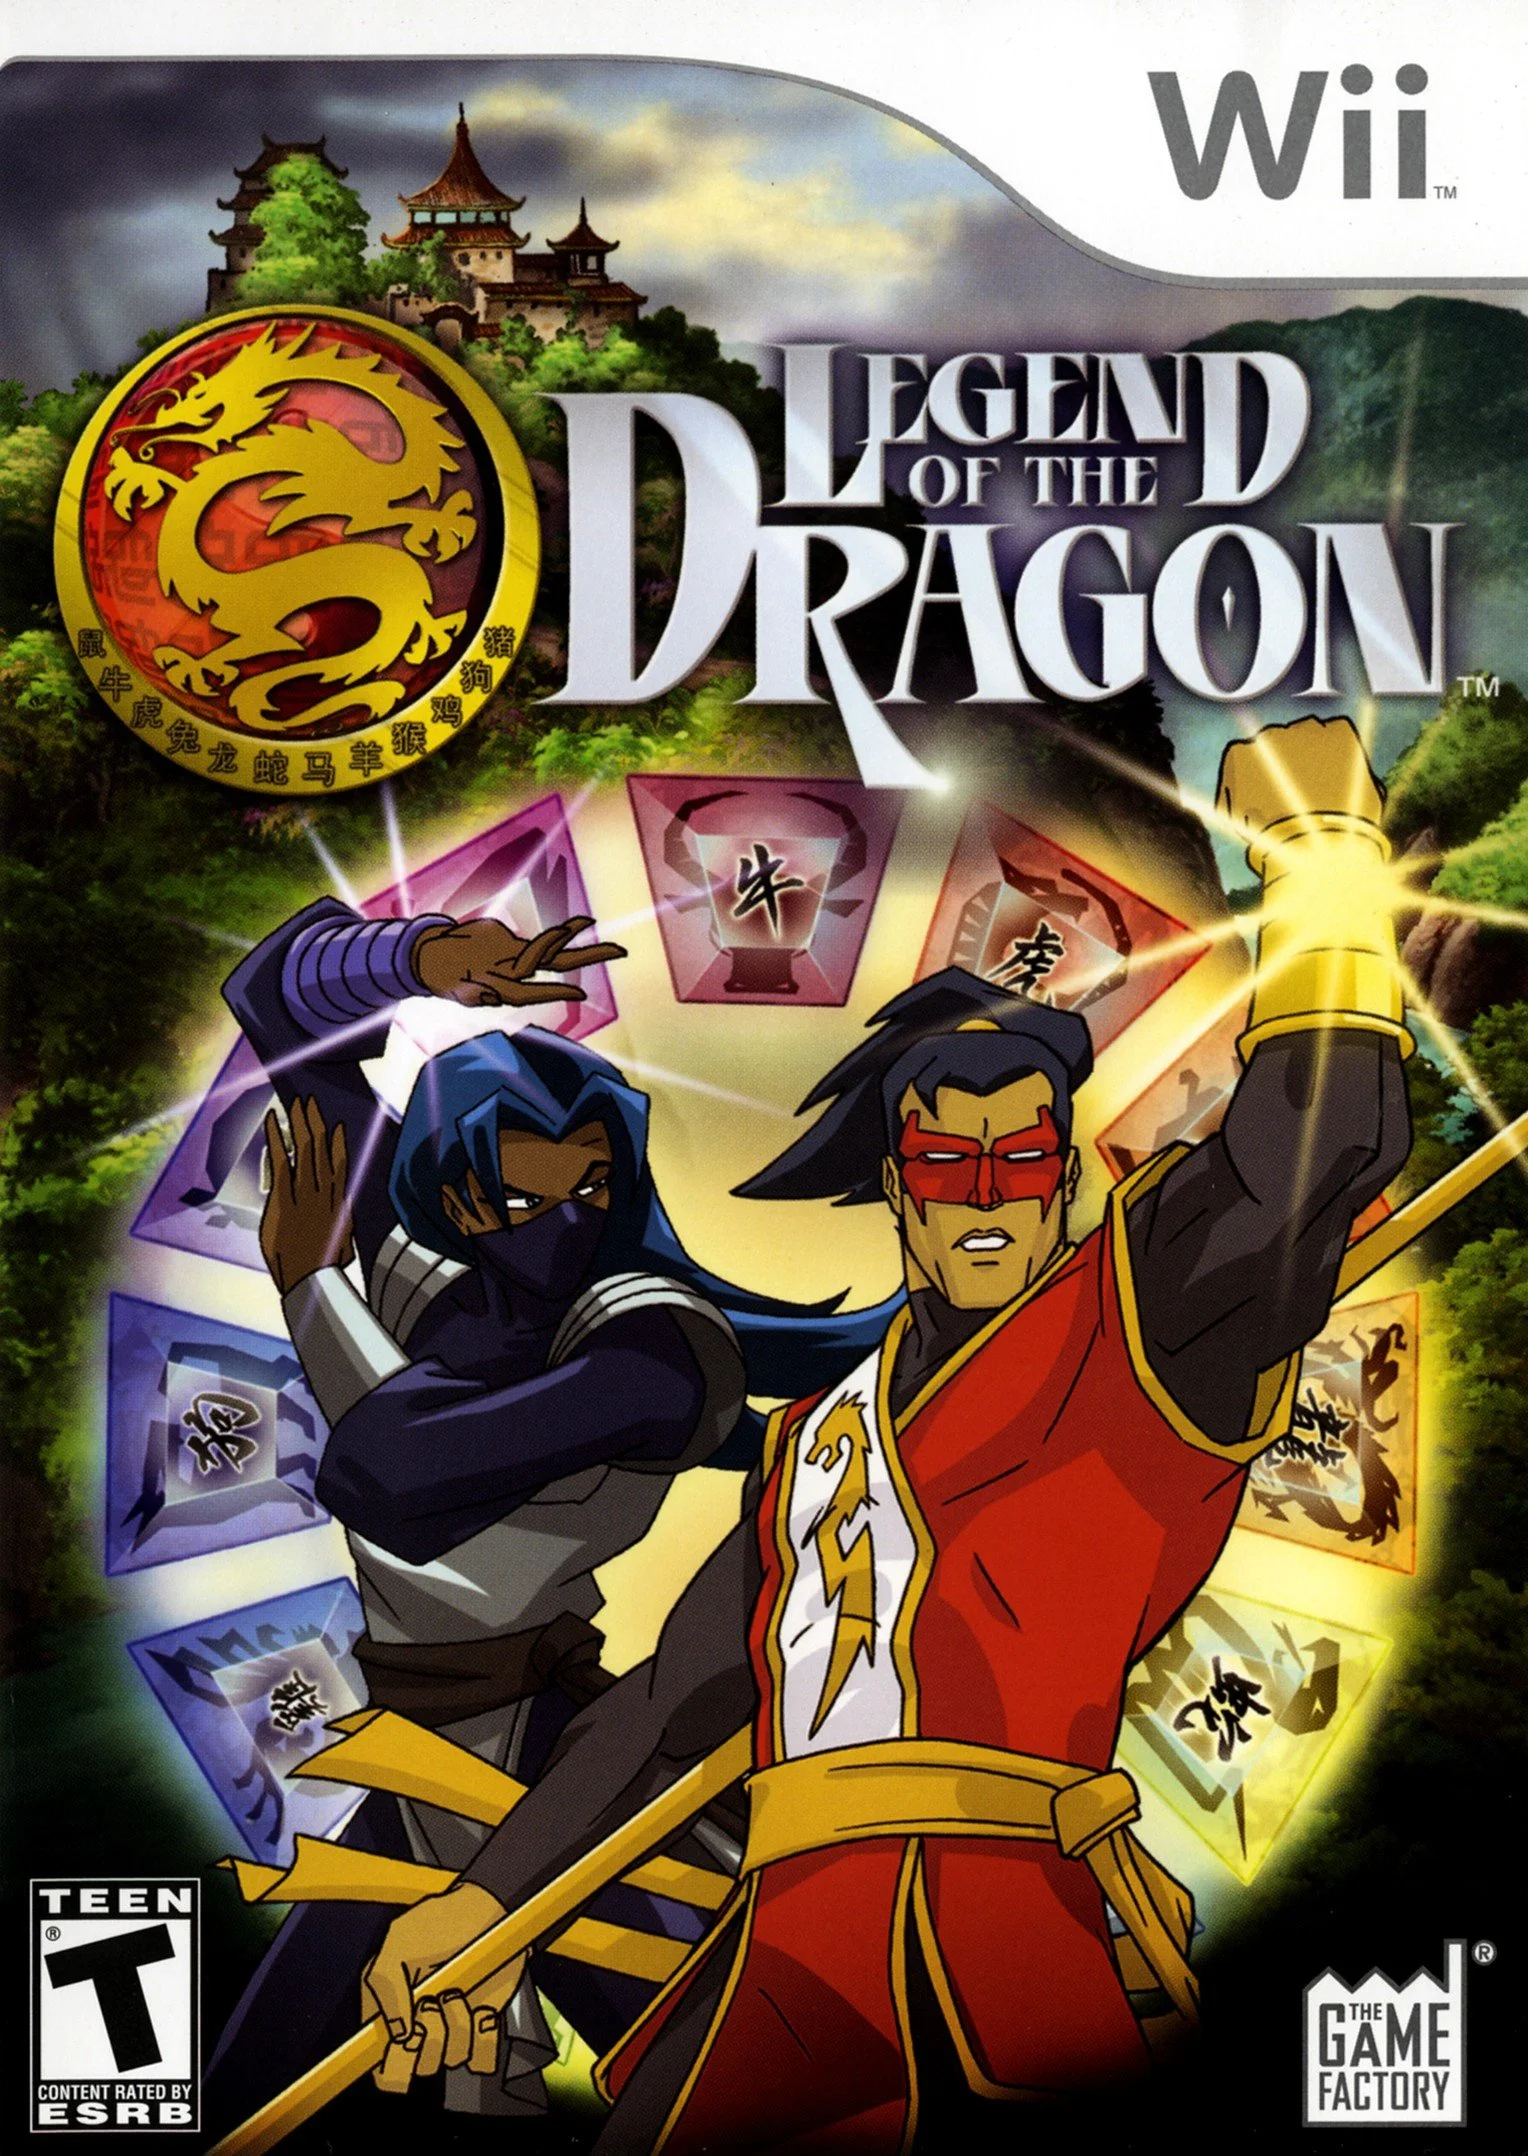 The Legend of the Dragon